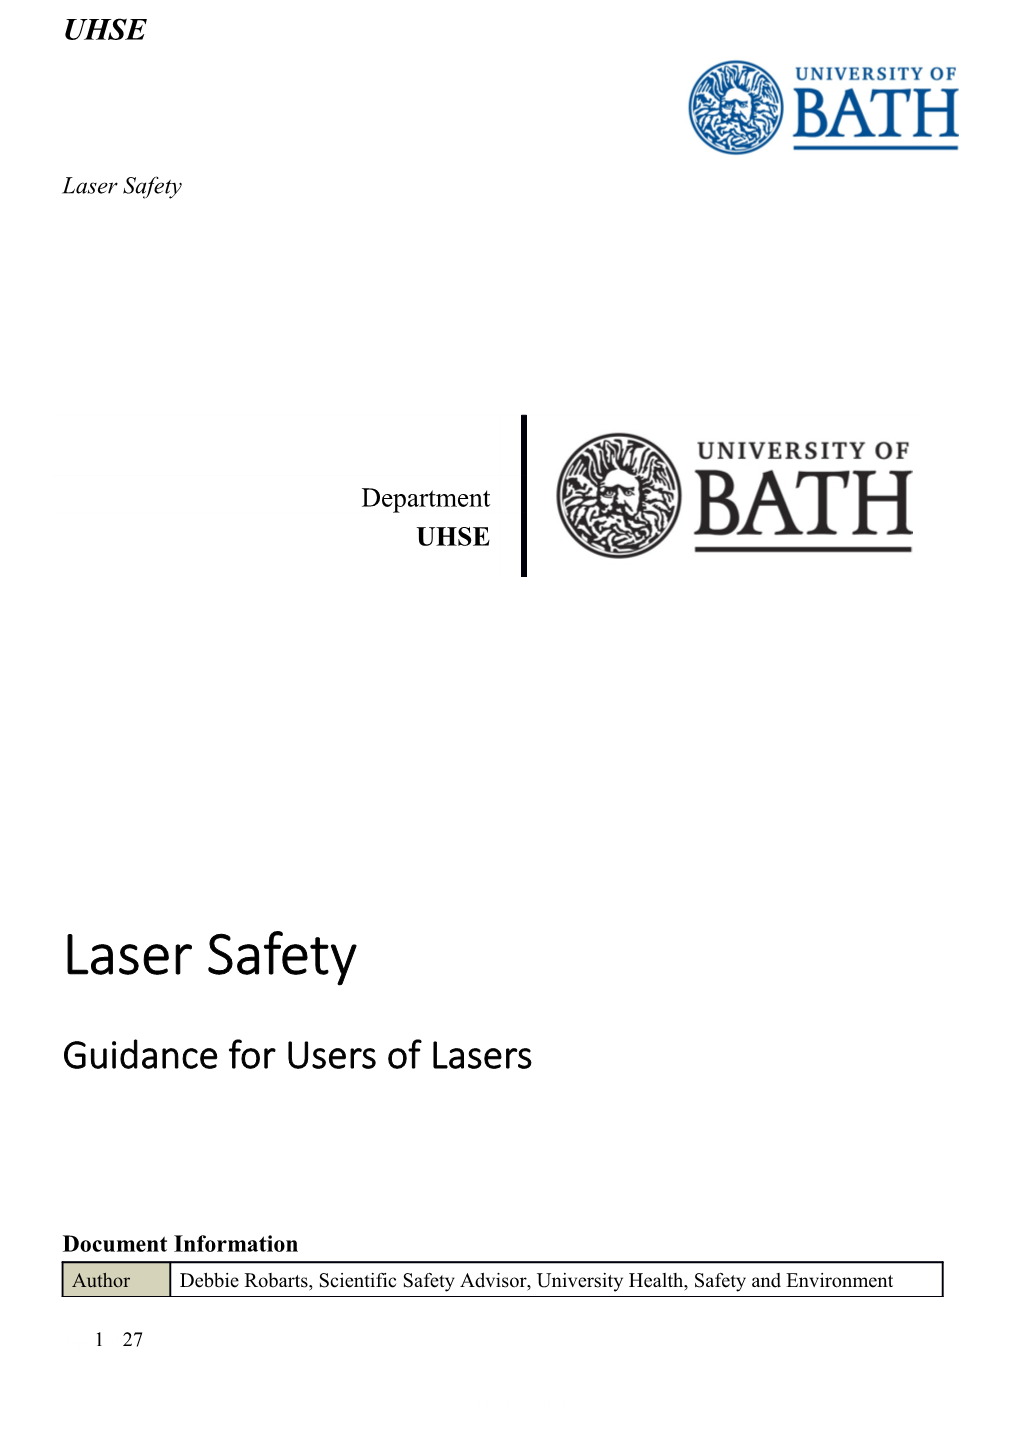 Guidance for Users of Lasers